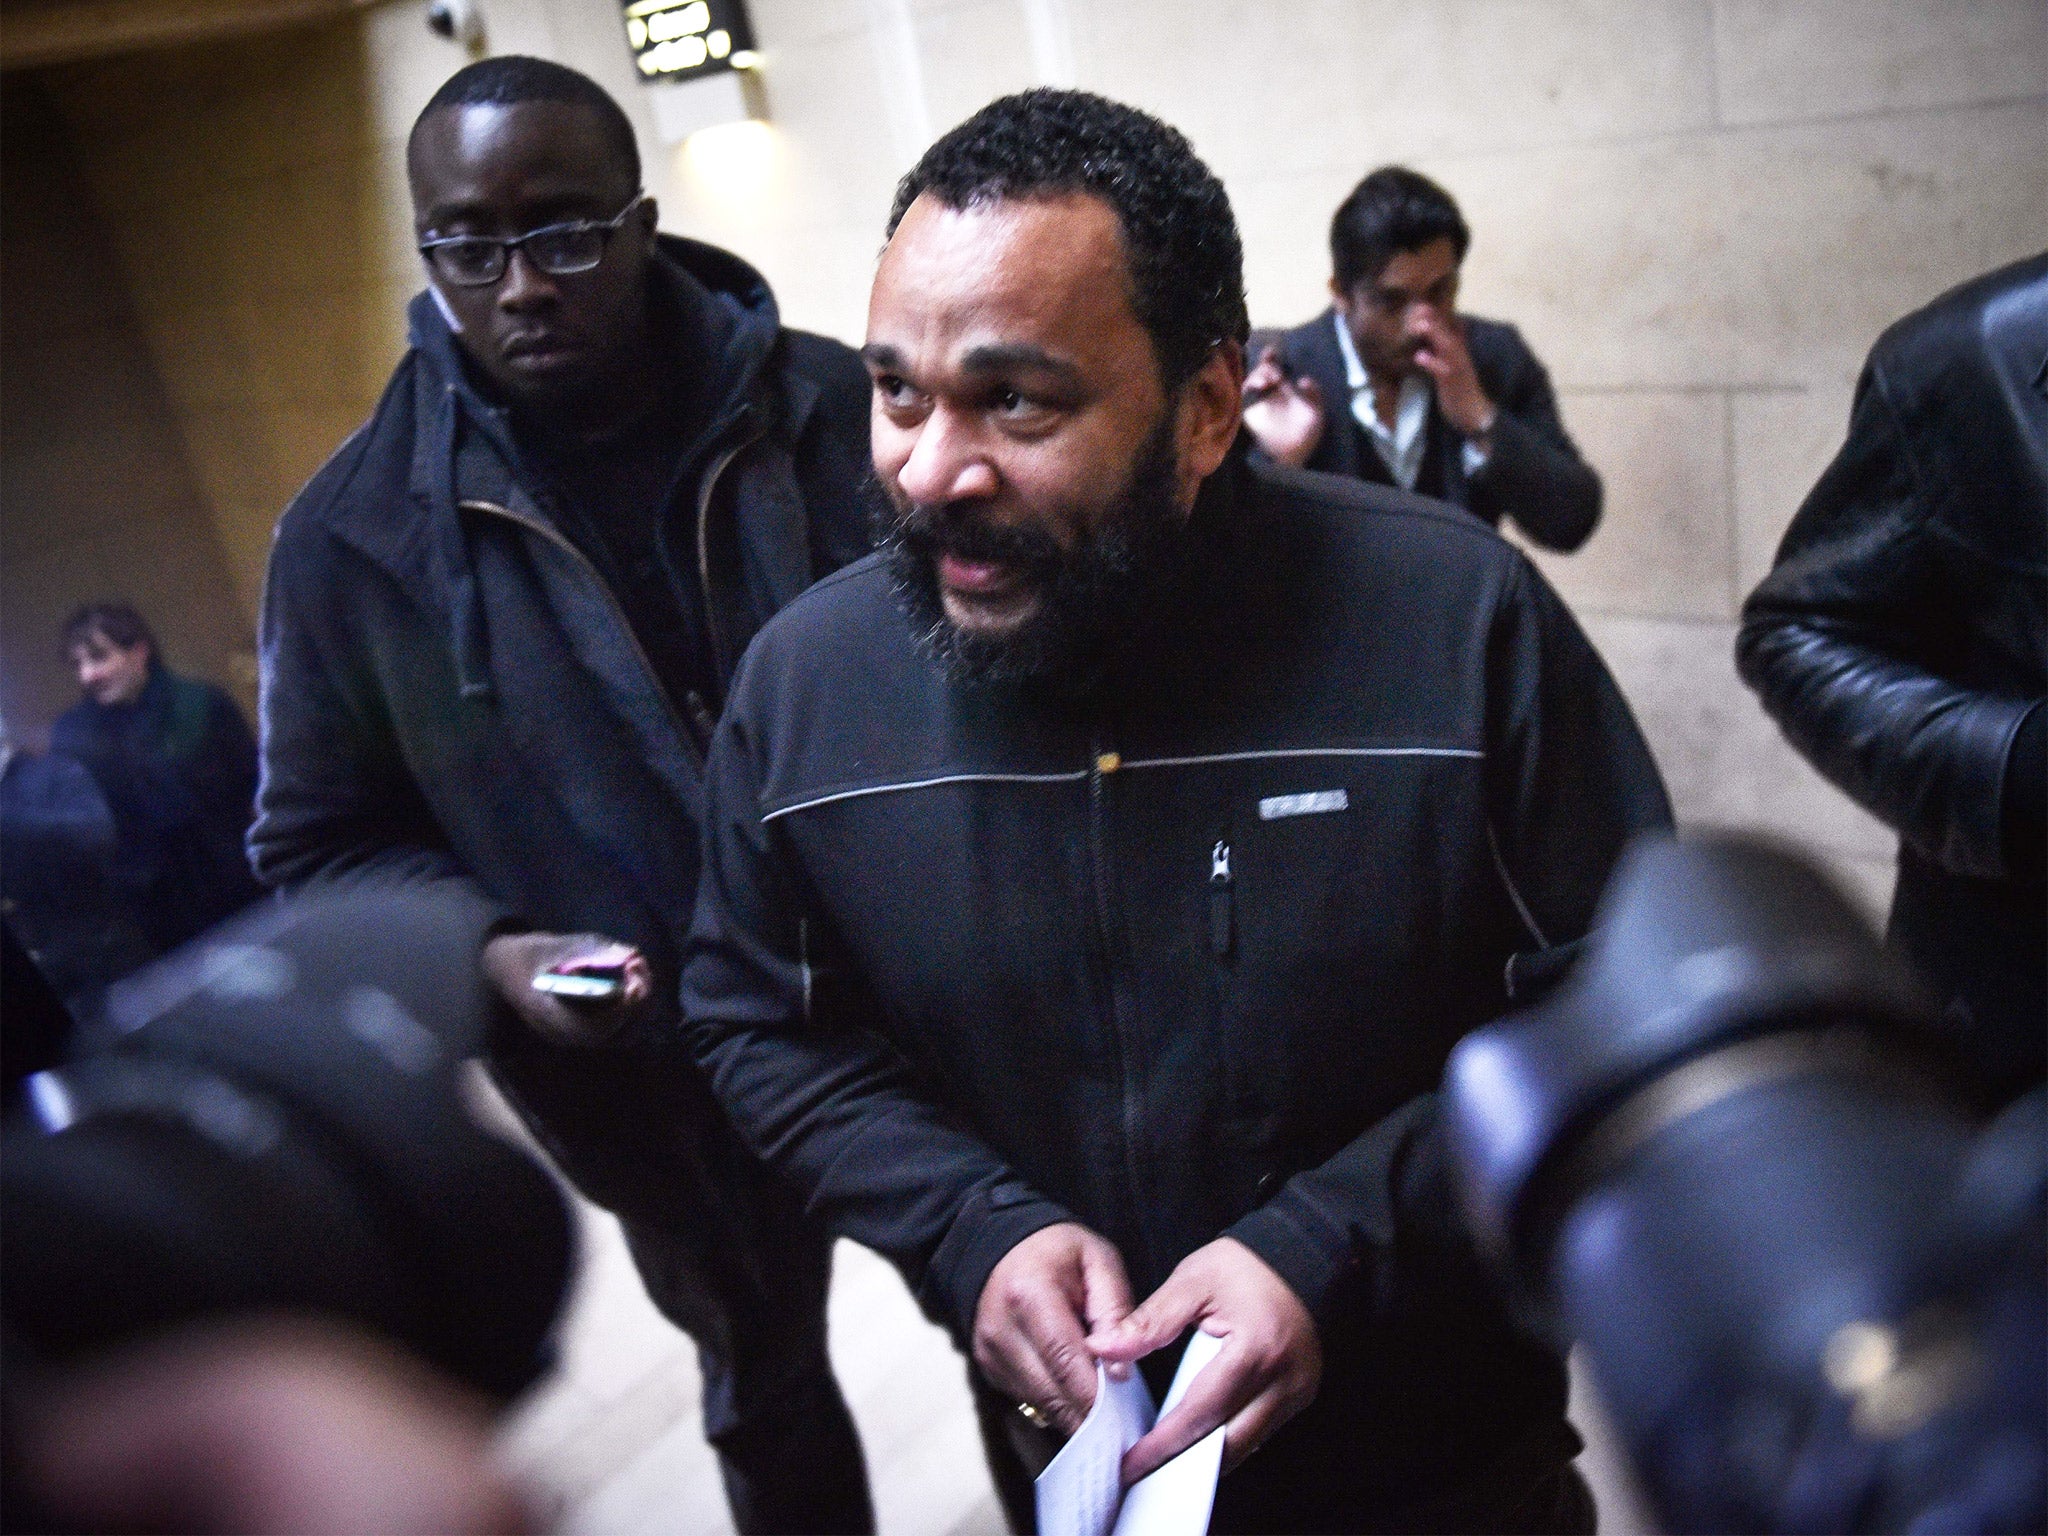 French comedian Dieudonné has been given a two month suspended sentence over Charlie Hebdo joke